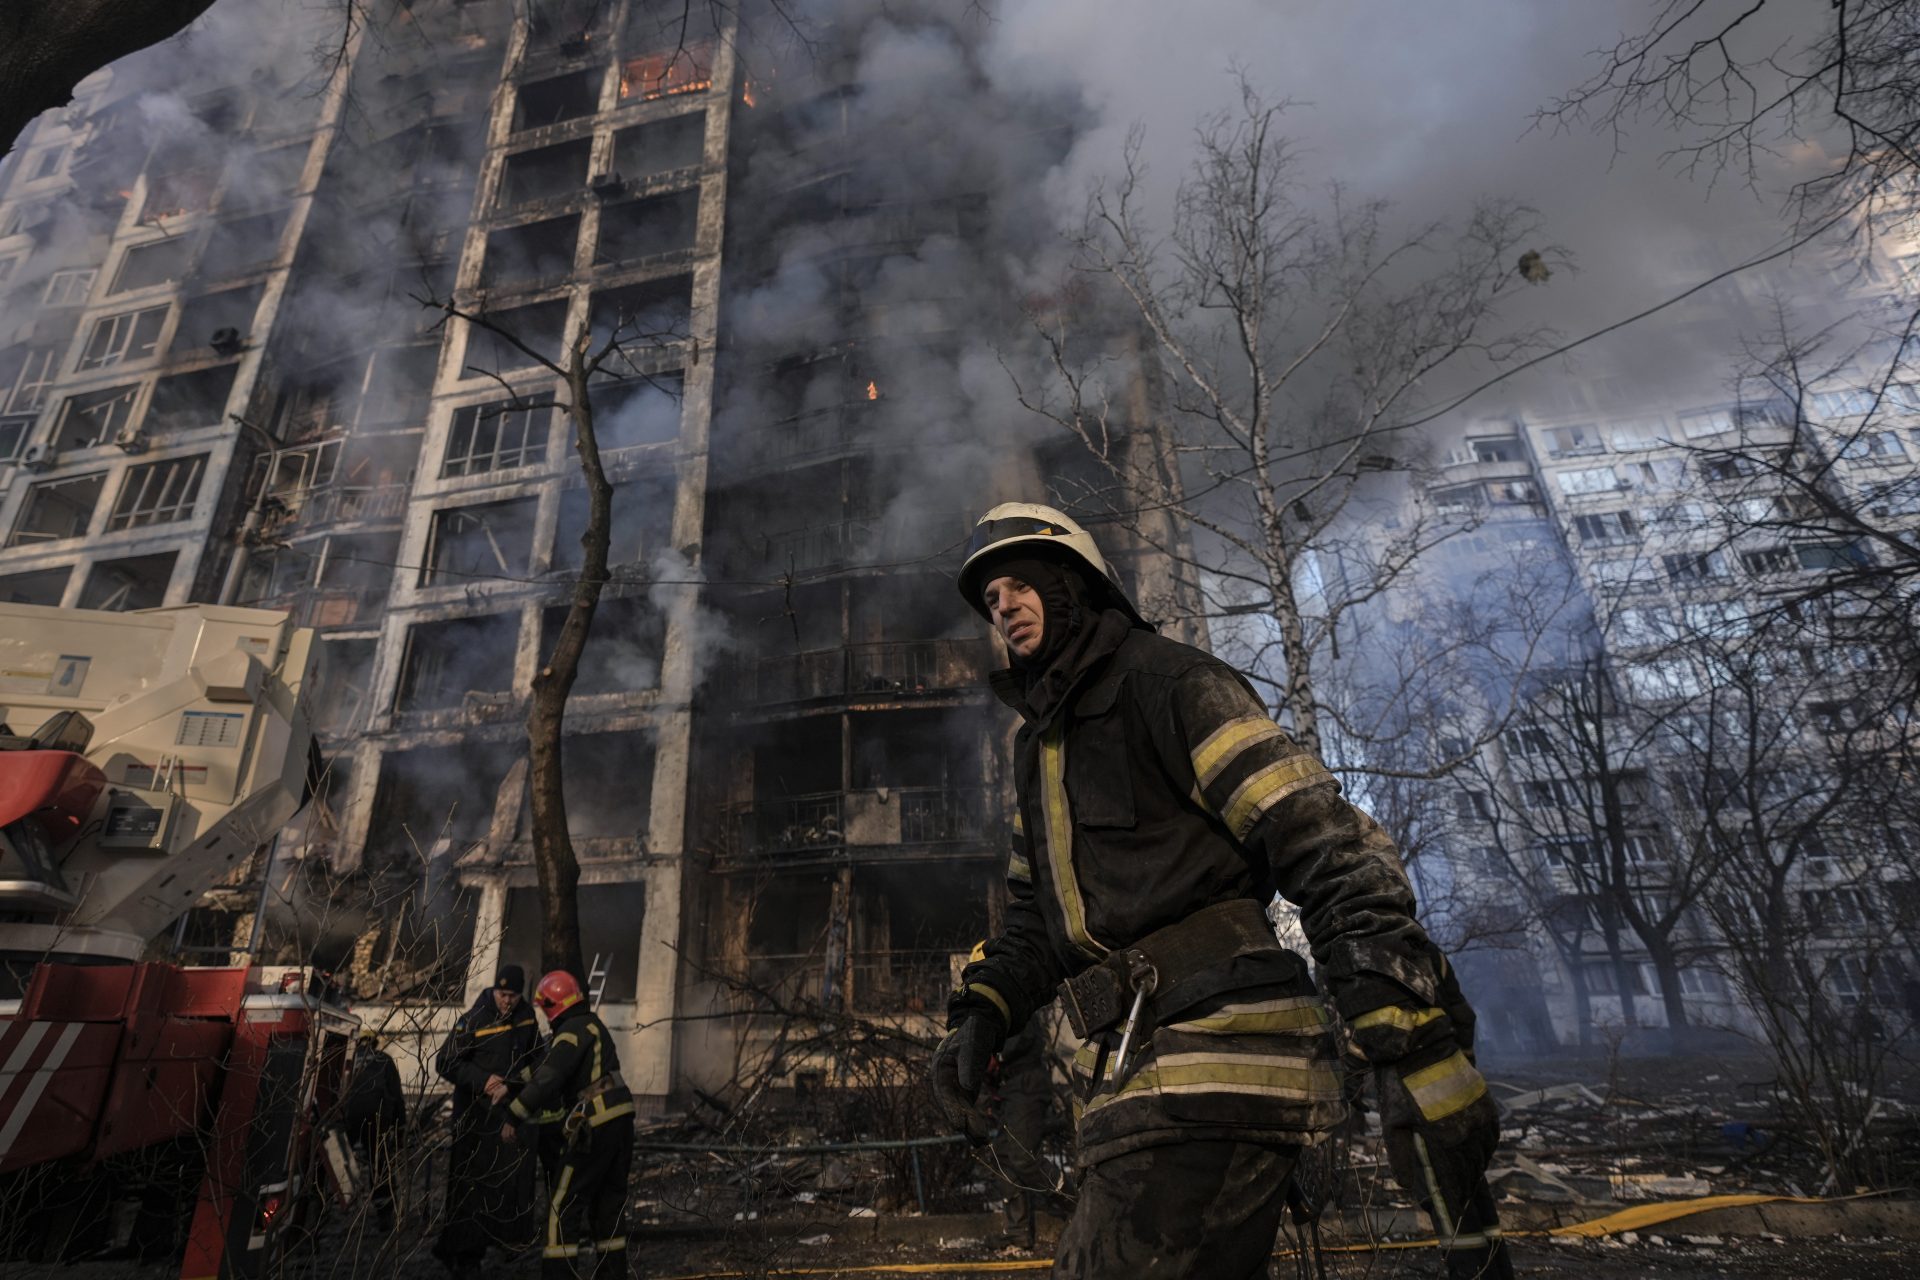 A firefighter walks outside a destroyed apartment building after a bombing in a residential area in Kyiv, Ukraine, Tuesday, March 15, 2022.